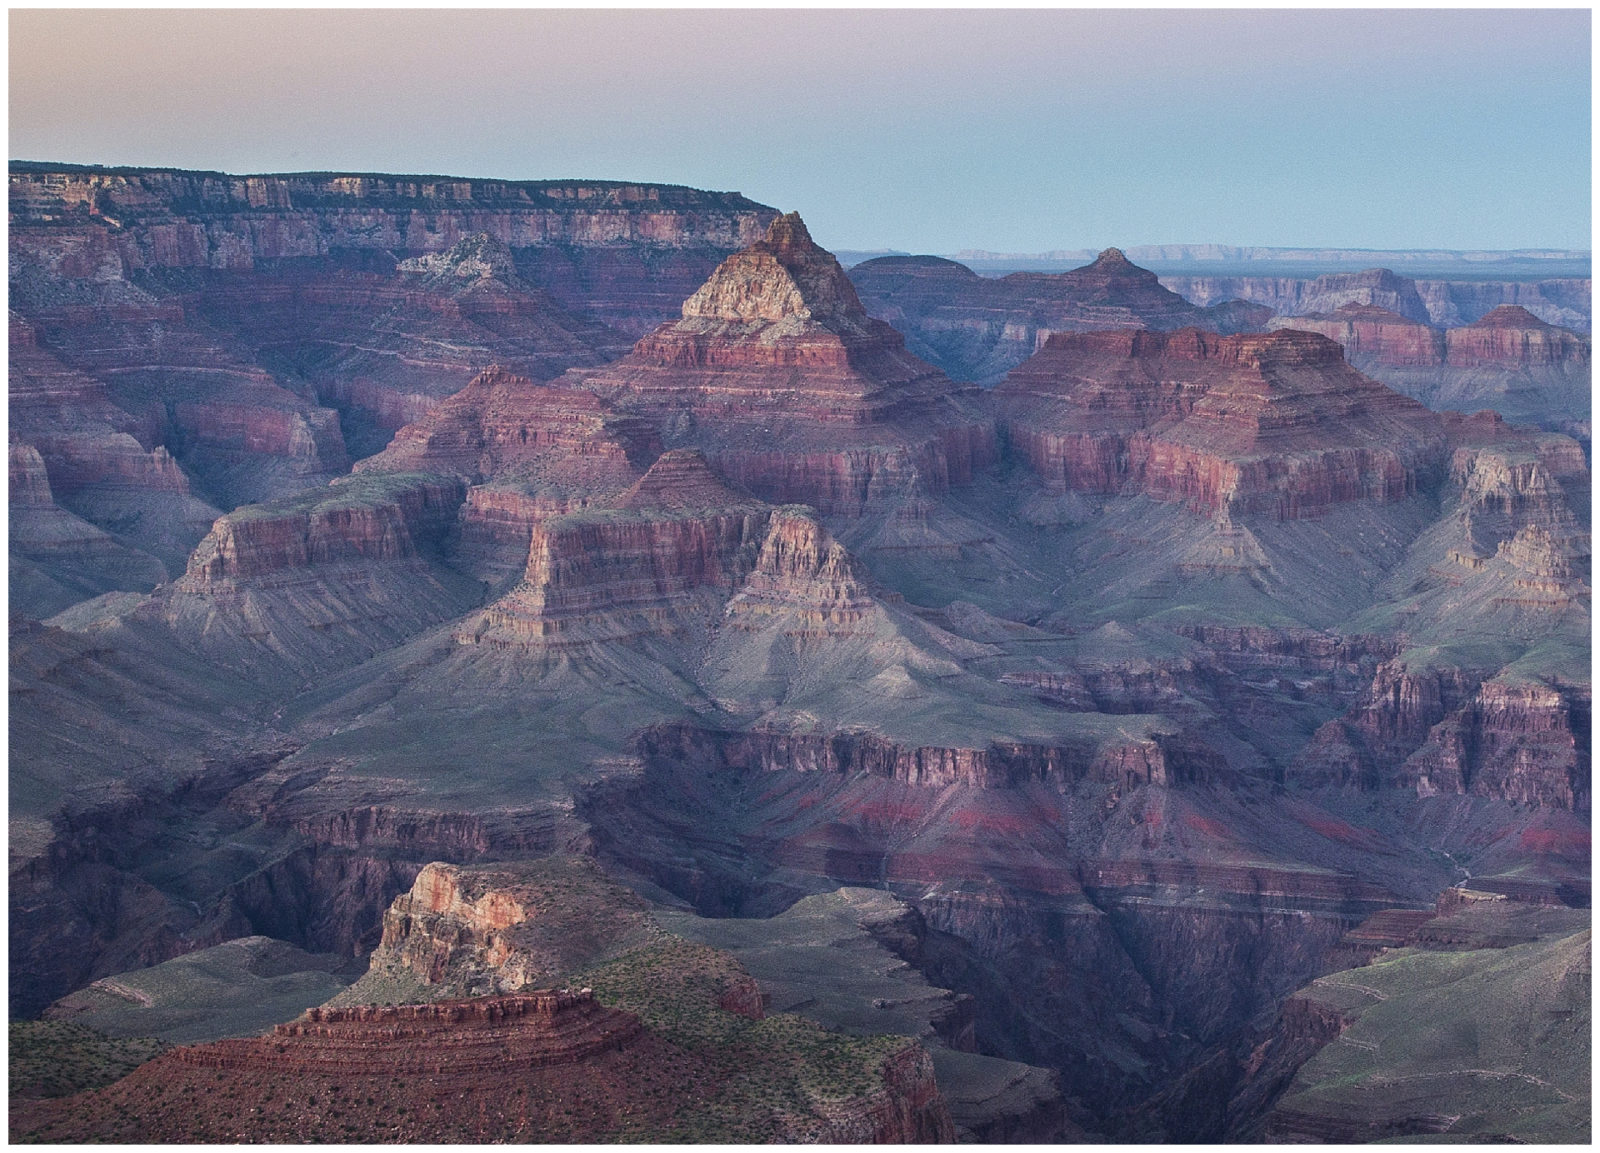 The south rim of the Grand Canyon at sunset in Arizona.